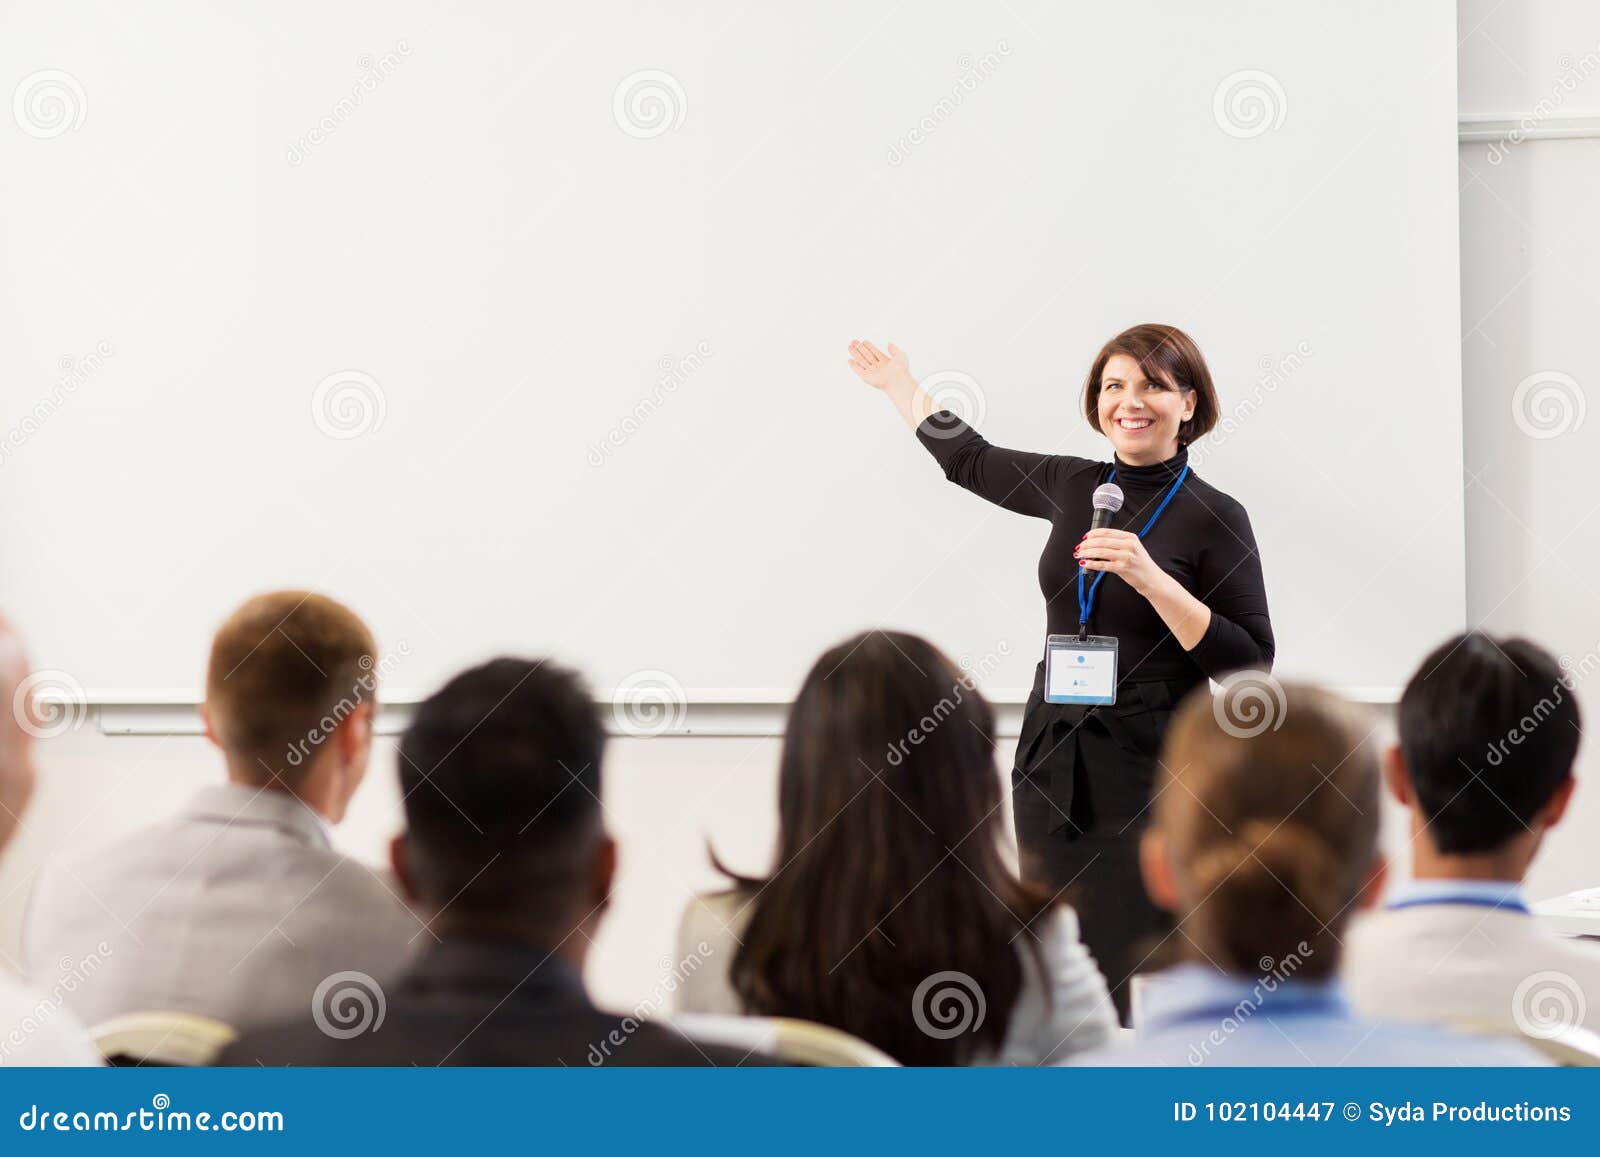 group of people at business conference or lecture